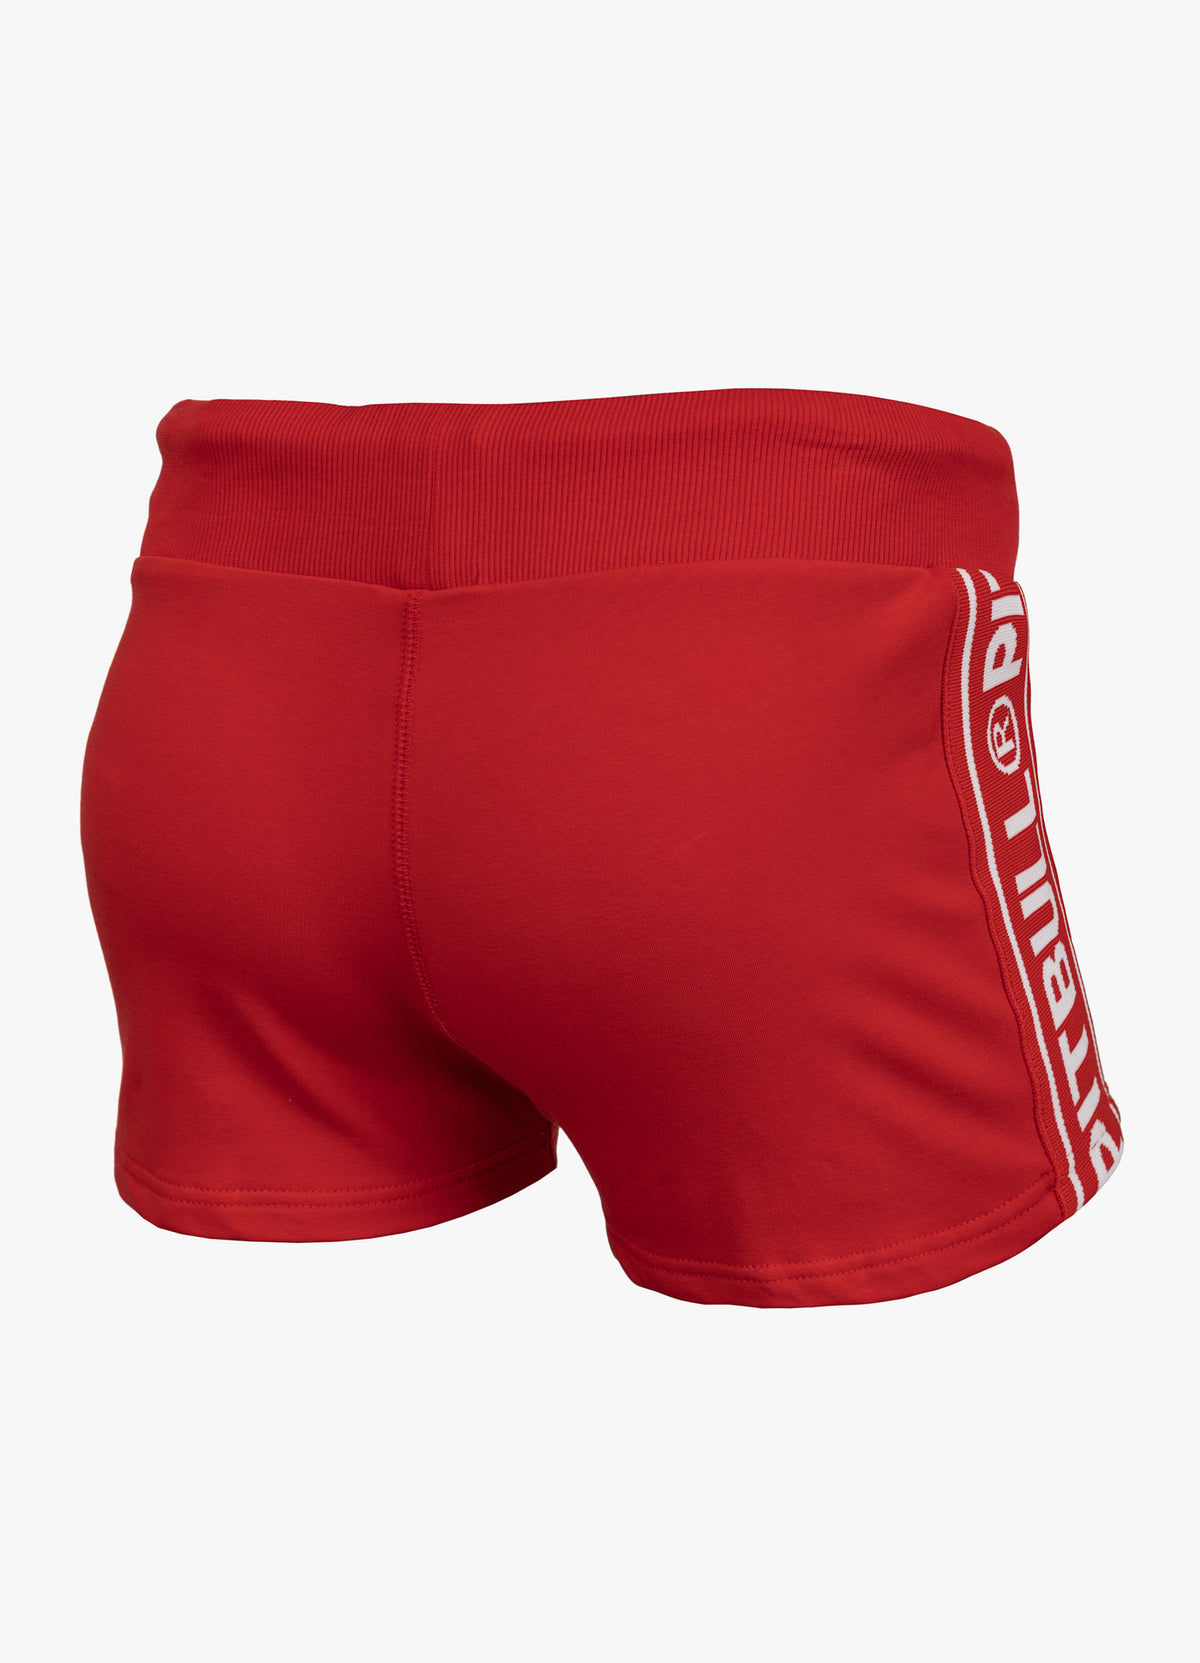 SMALL LOGO FRENCH TERRY 21 Red shorts.